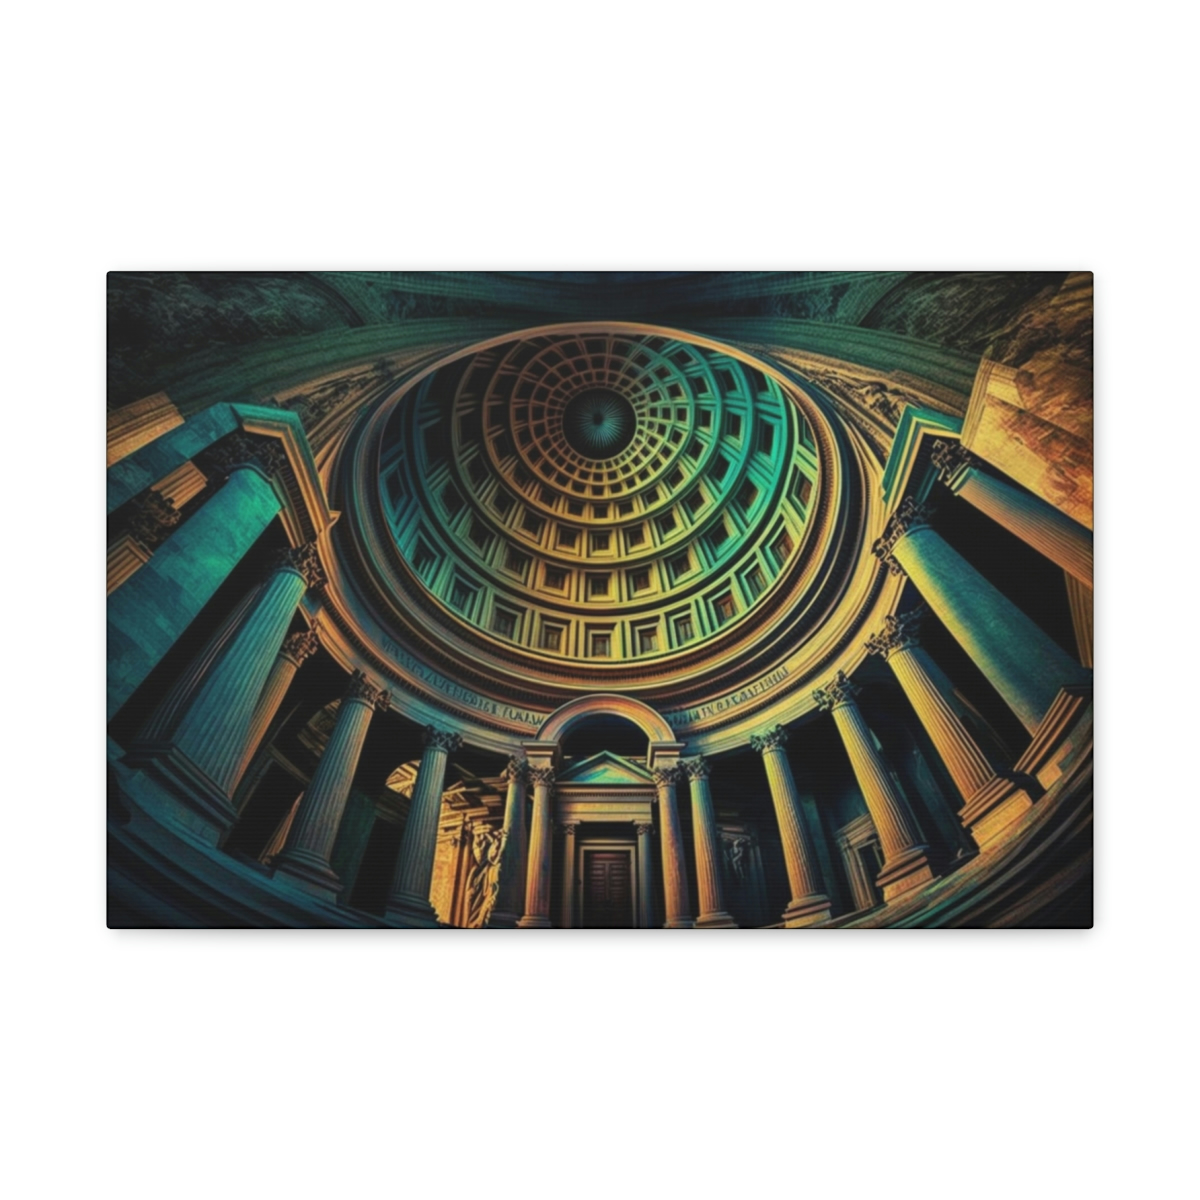 Trippy Art Canvas Print: The Great Dome